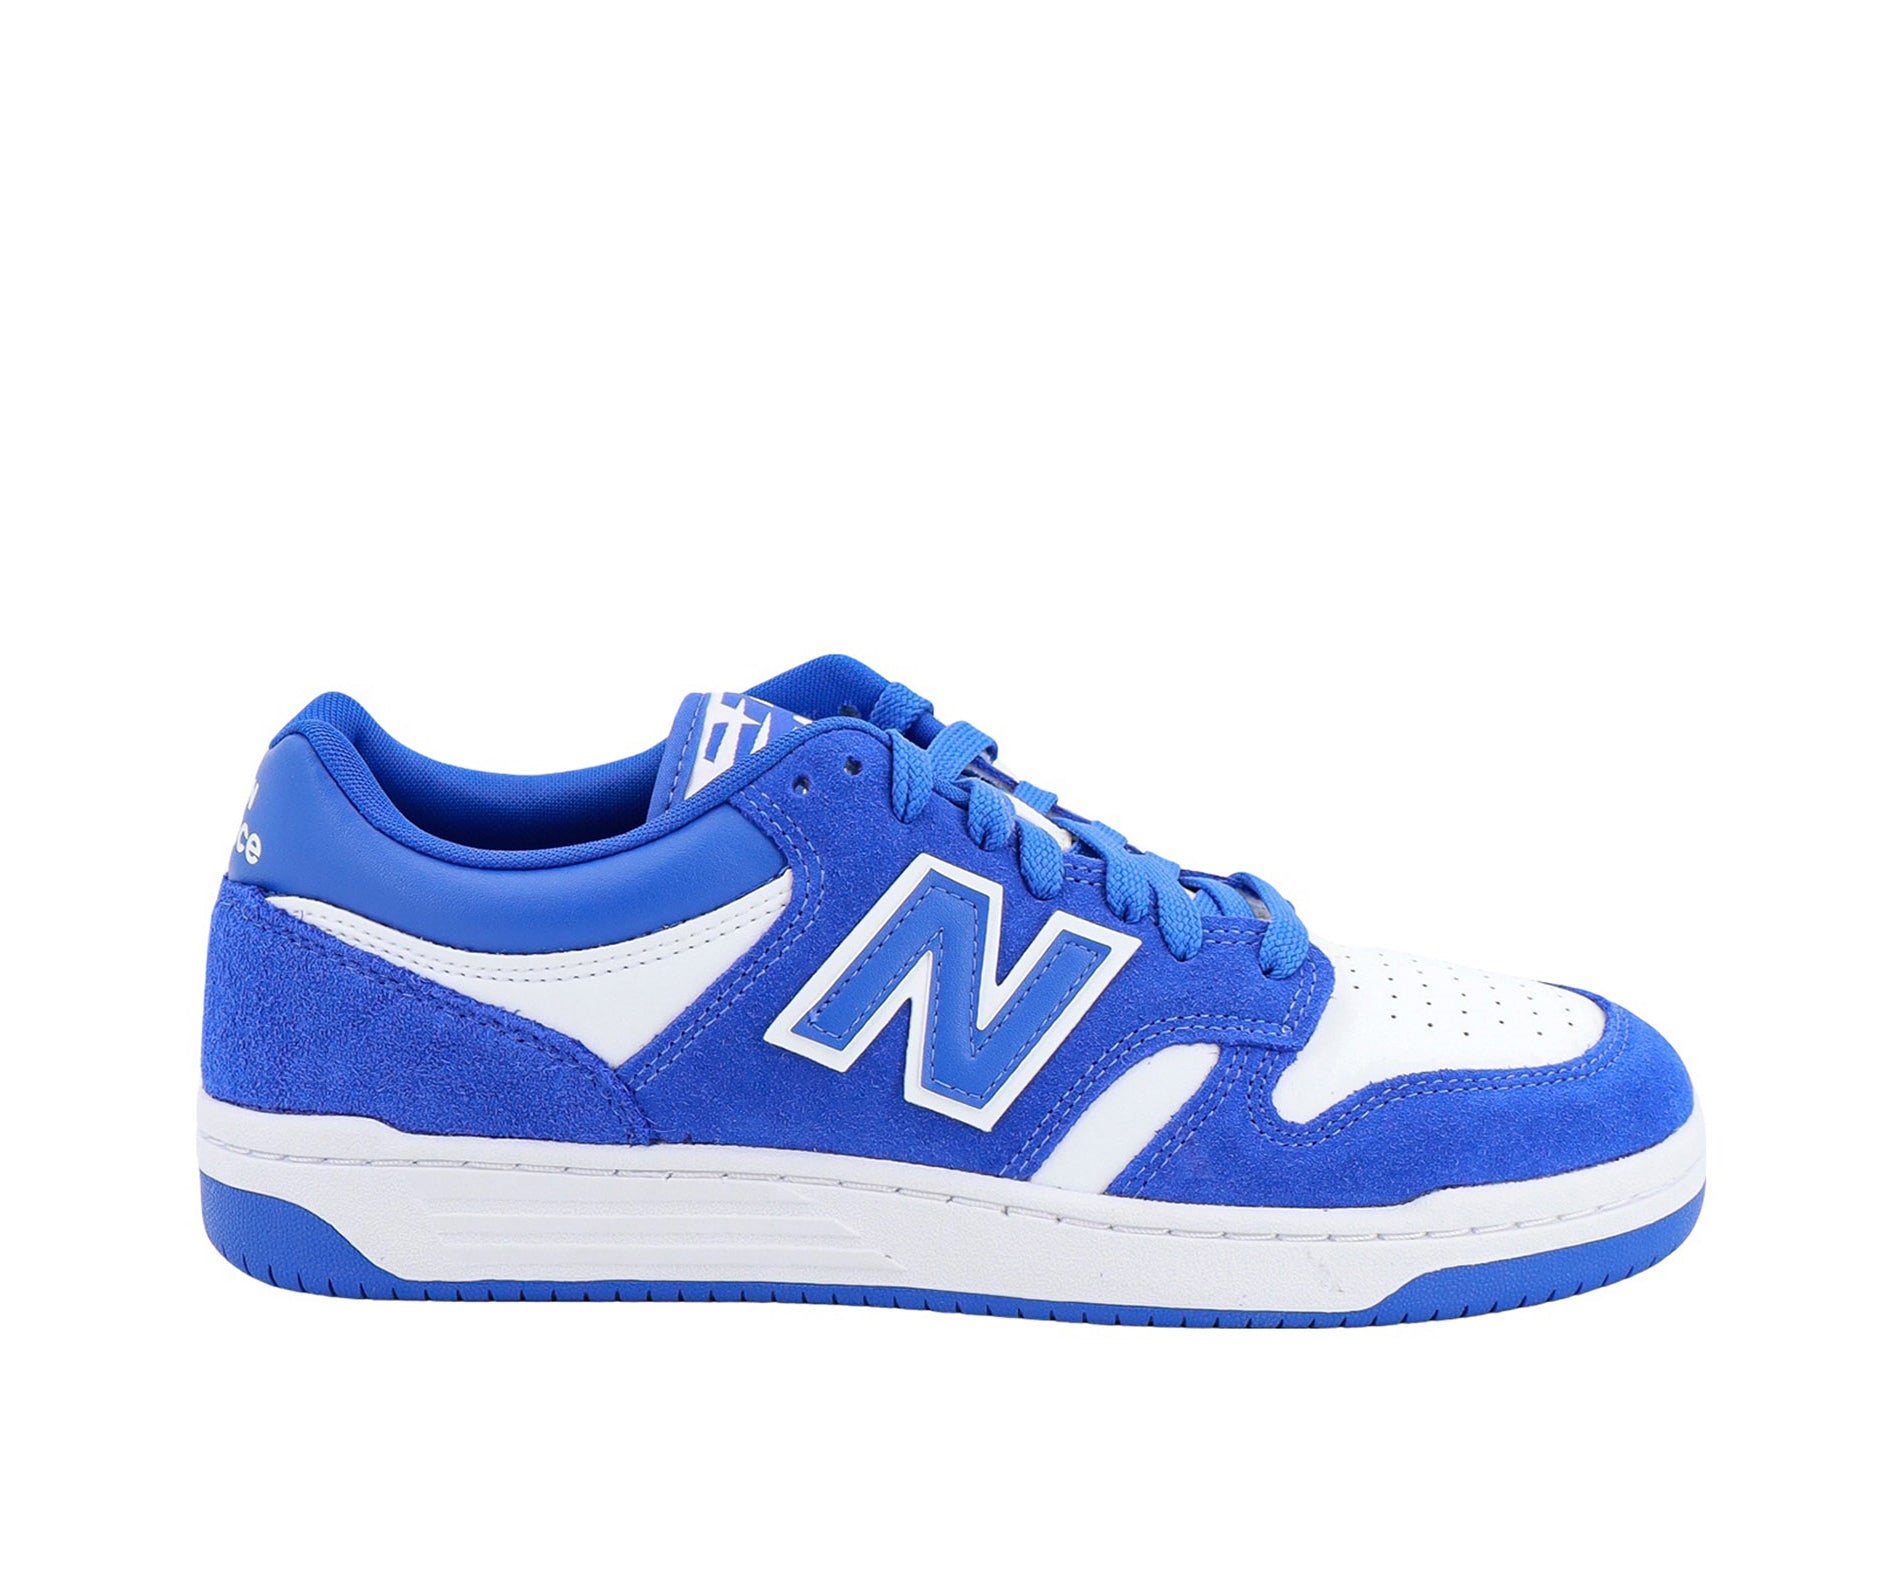 A white leather New Balance basketball shoe with royal blue suede accents.